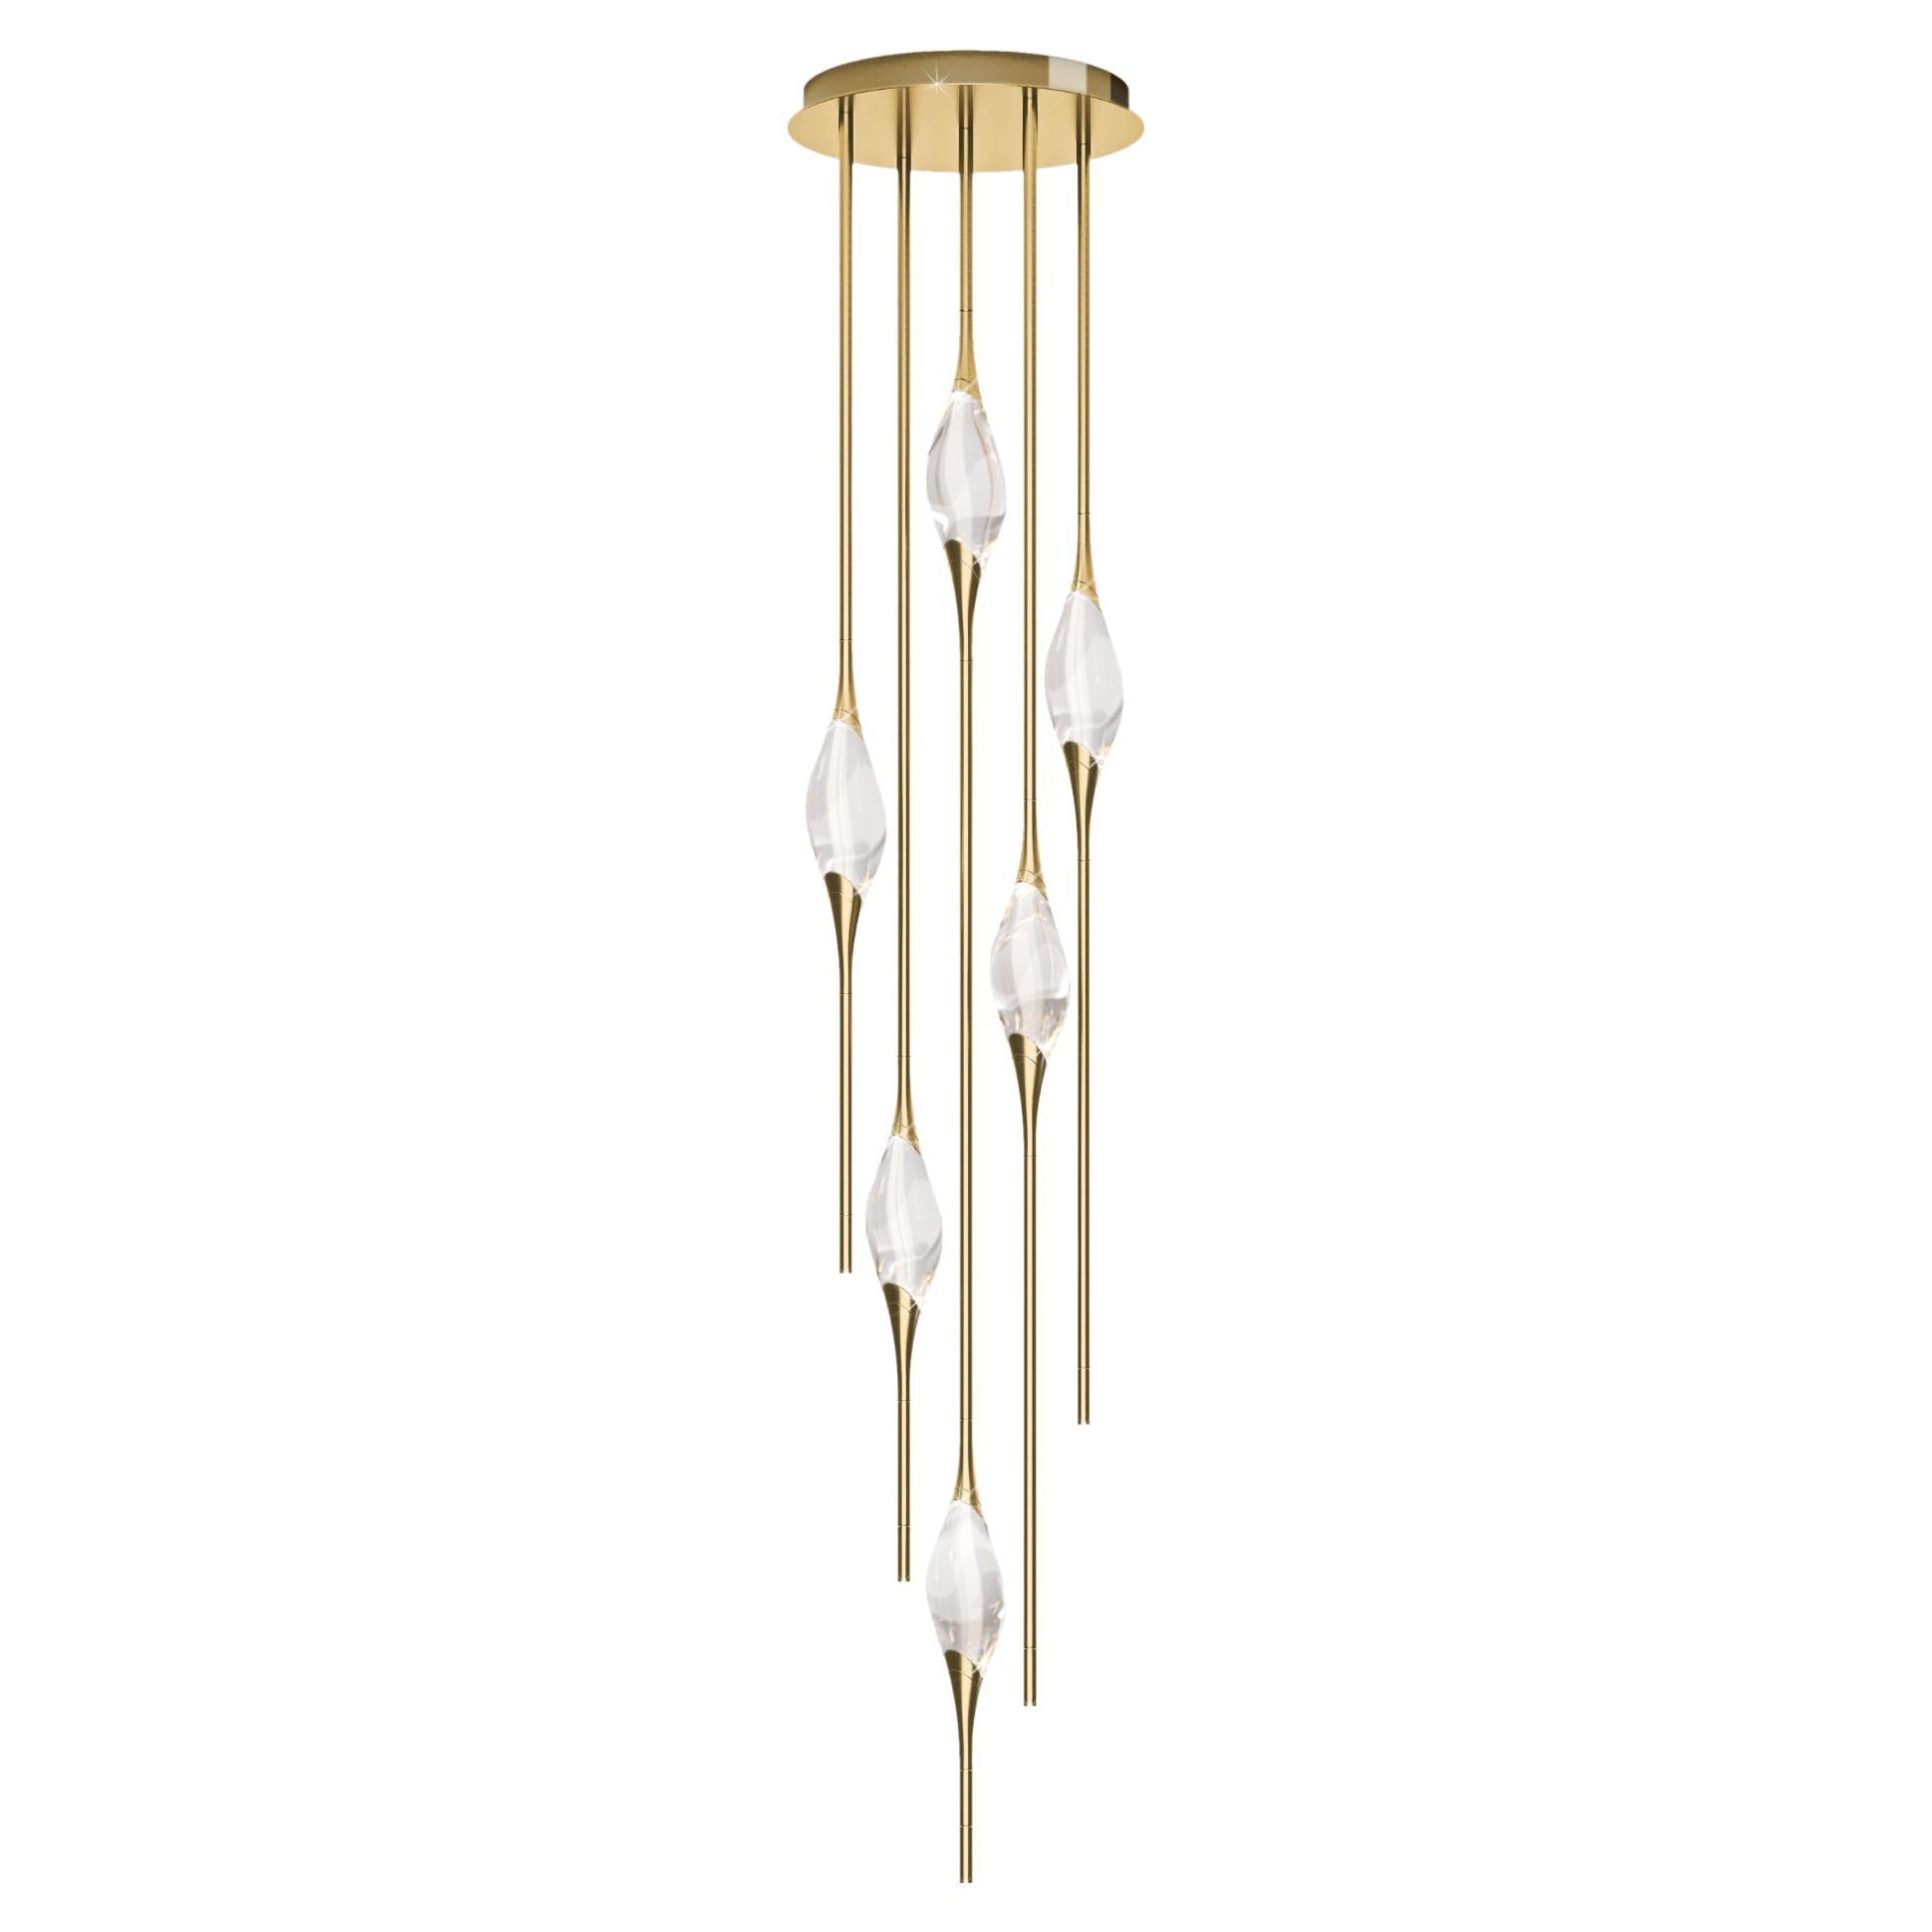 "Il Pezzo 12 Cluster Chandelier" - height 200cm/78.7" - polished brass - crystal